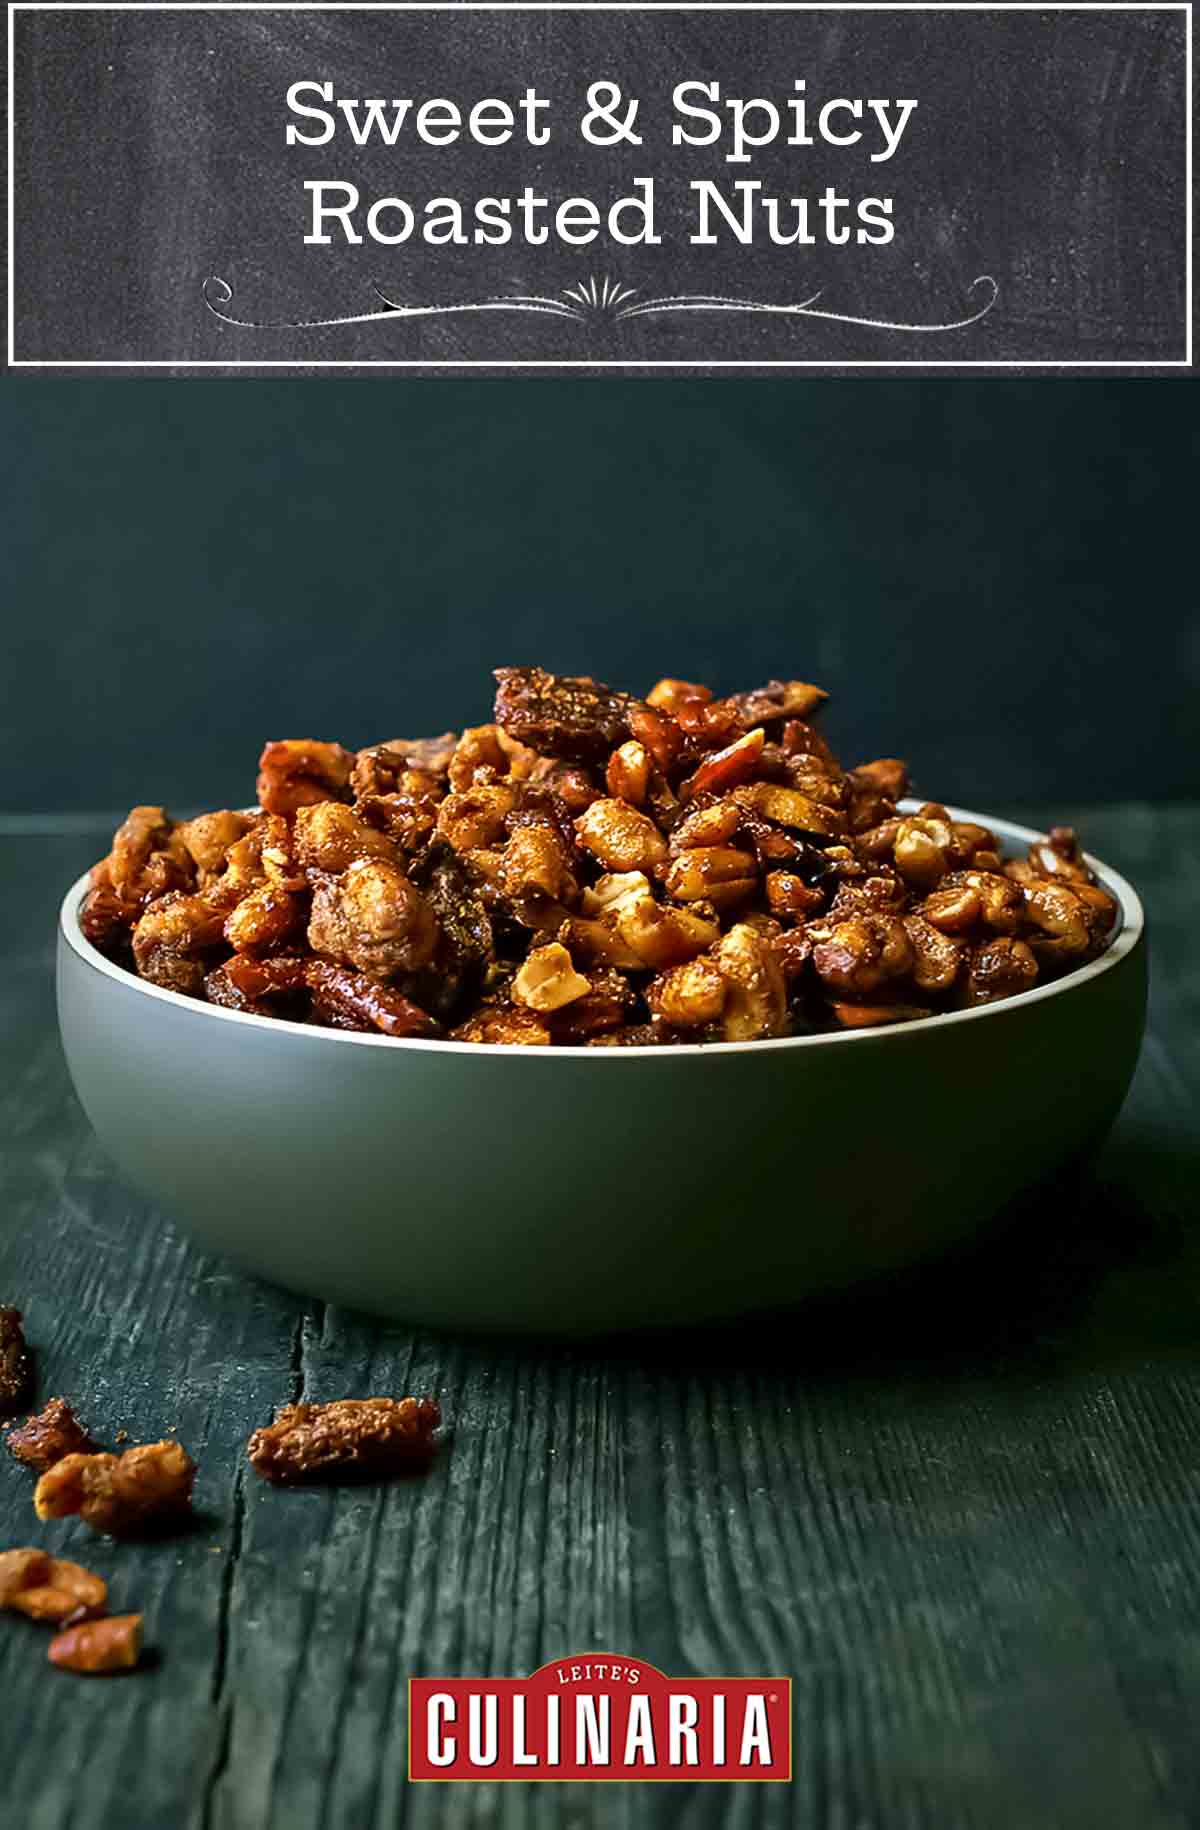 Sweet and spicy roasted nuts in a large green bowl on a wooden table.